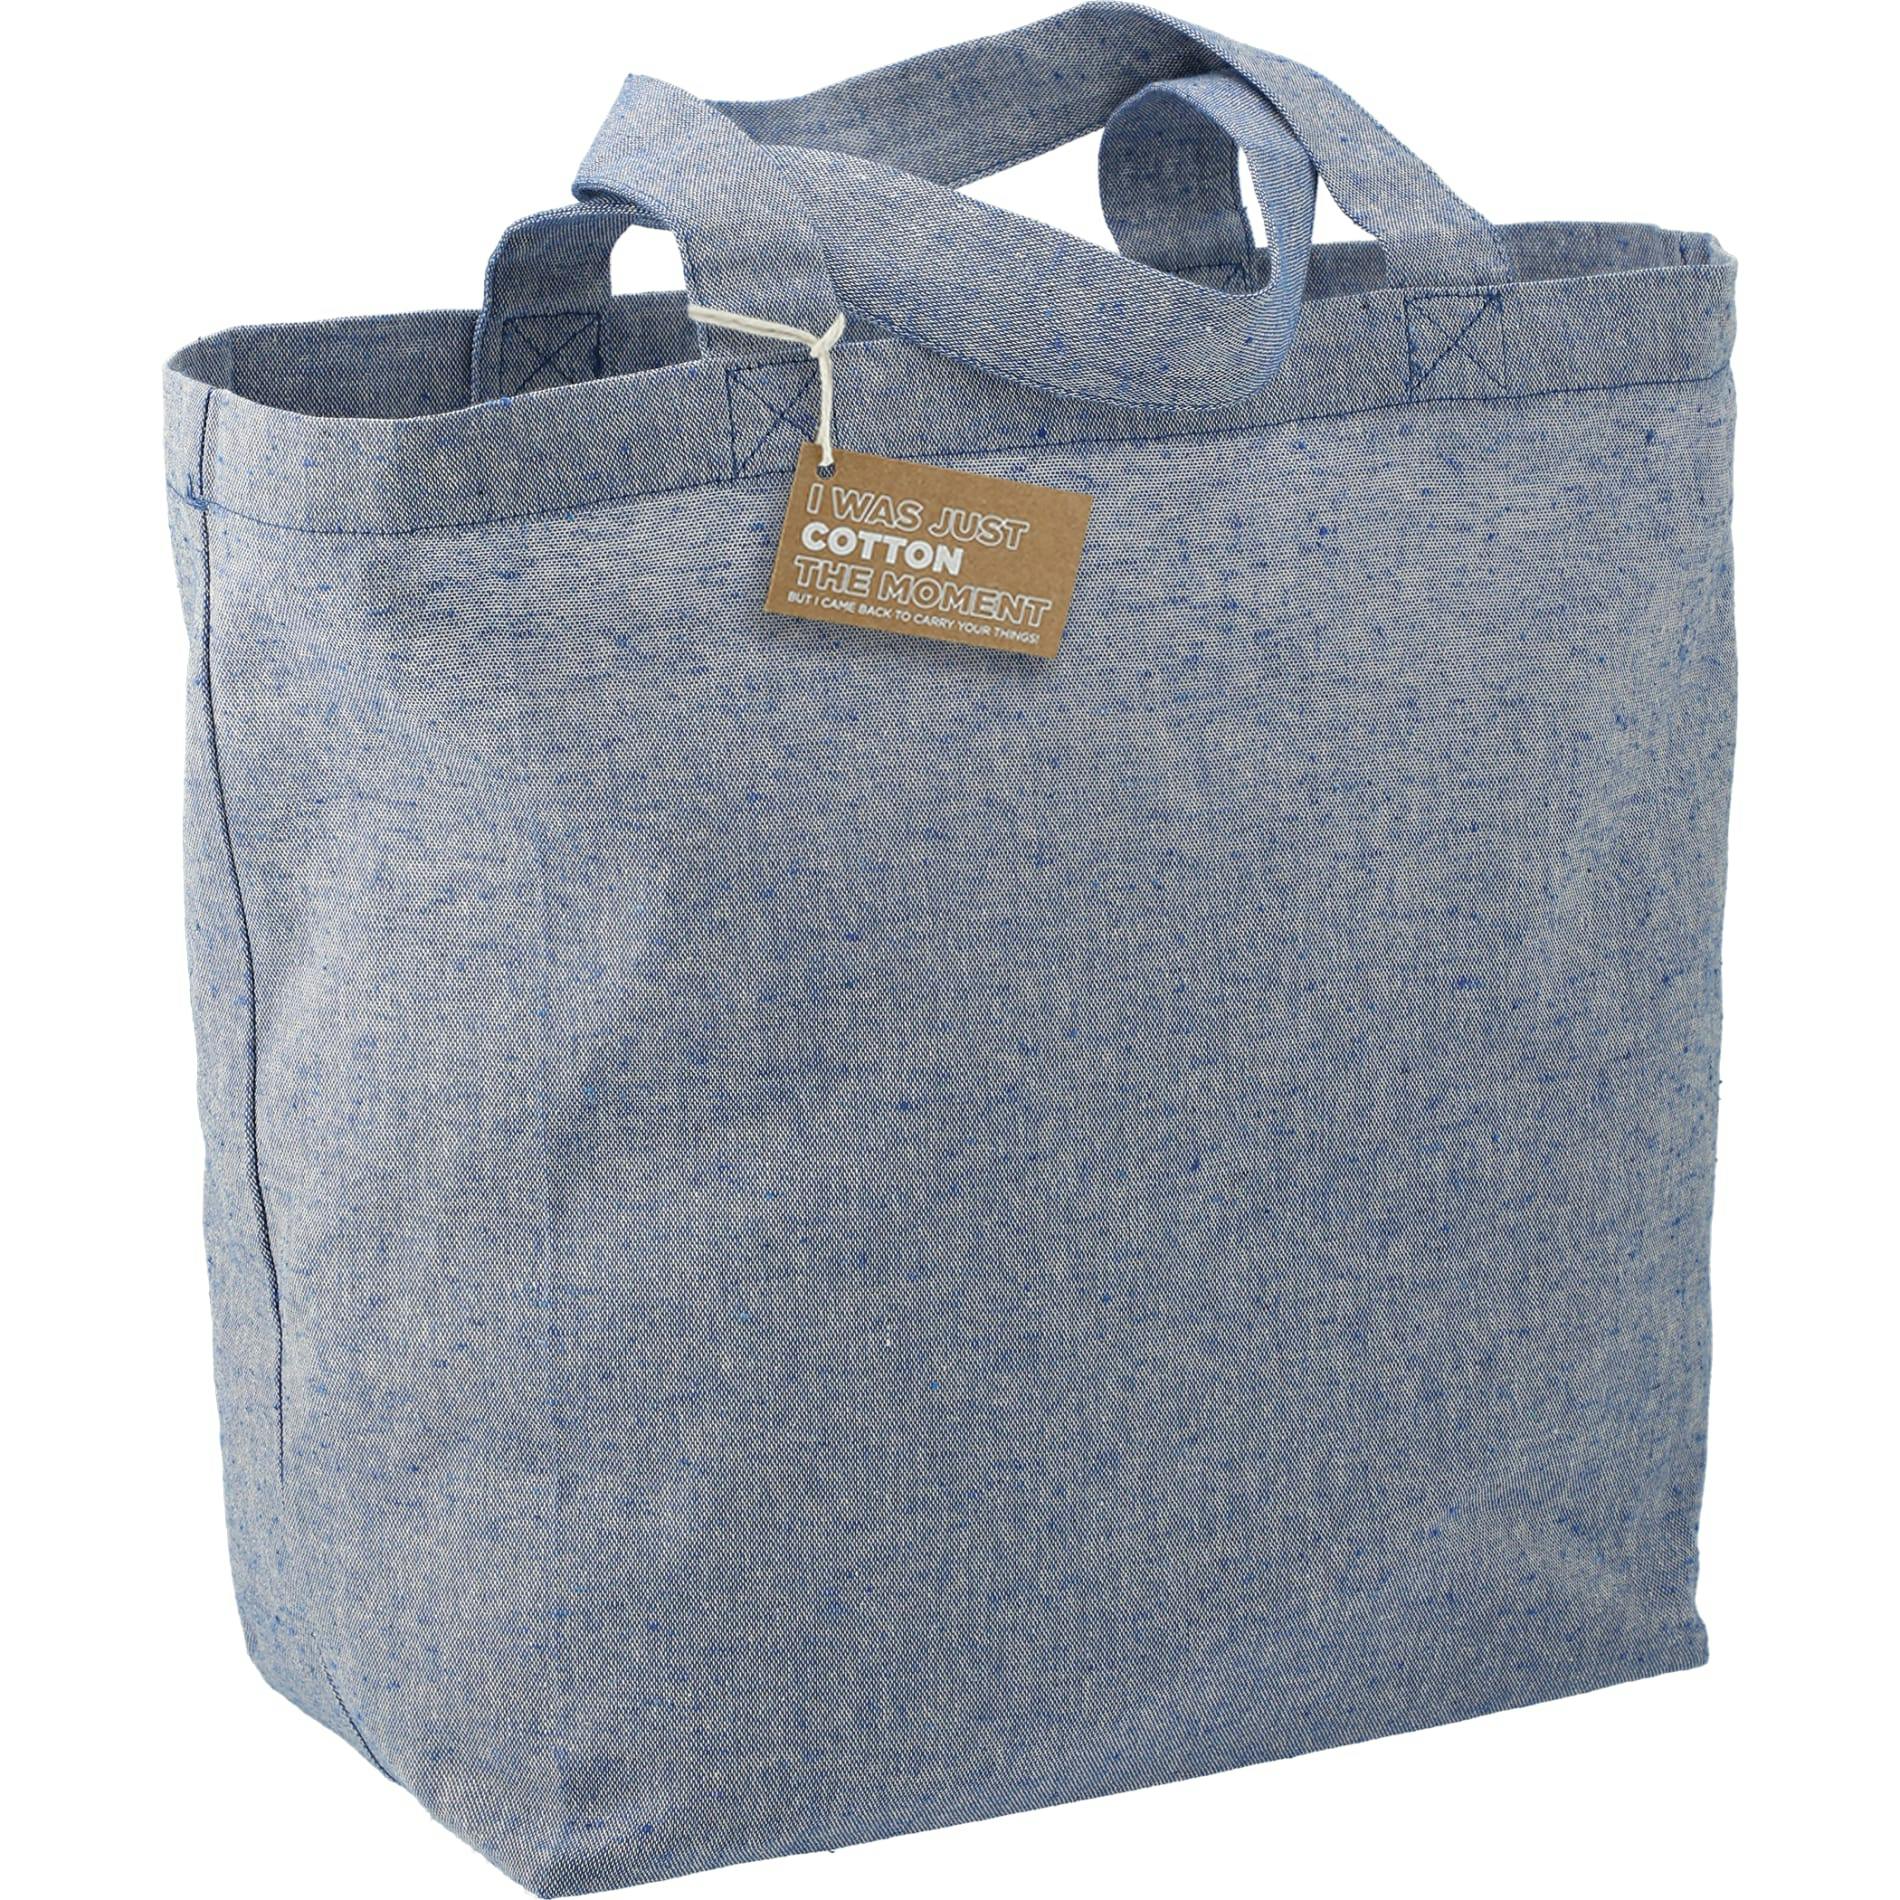 Recycled 5oz Cotton Twill Grocery Tote - additional Image 3